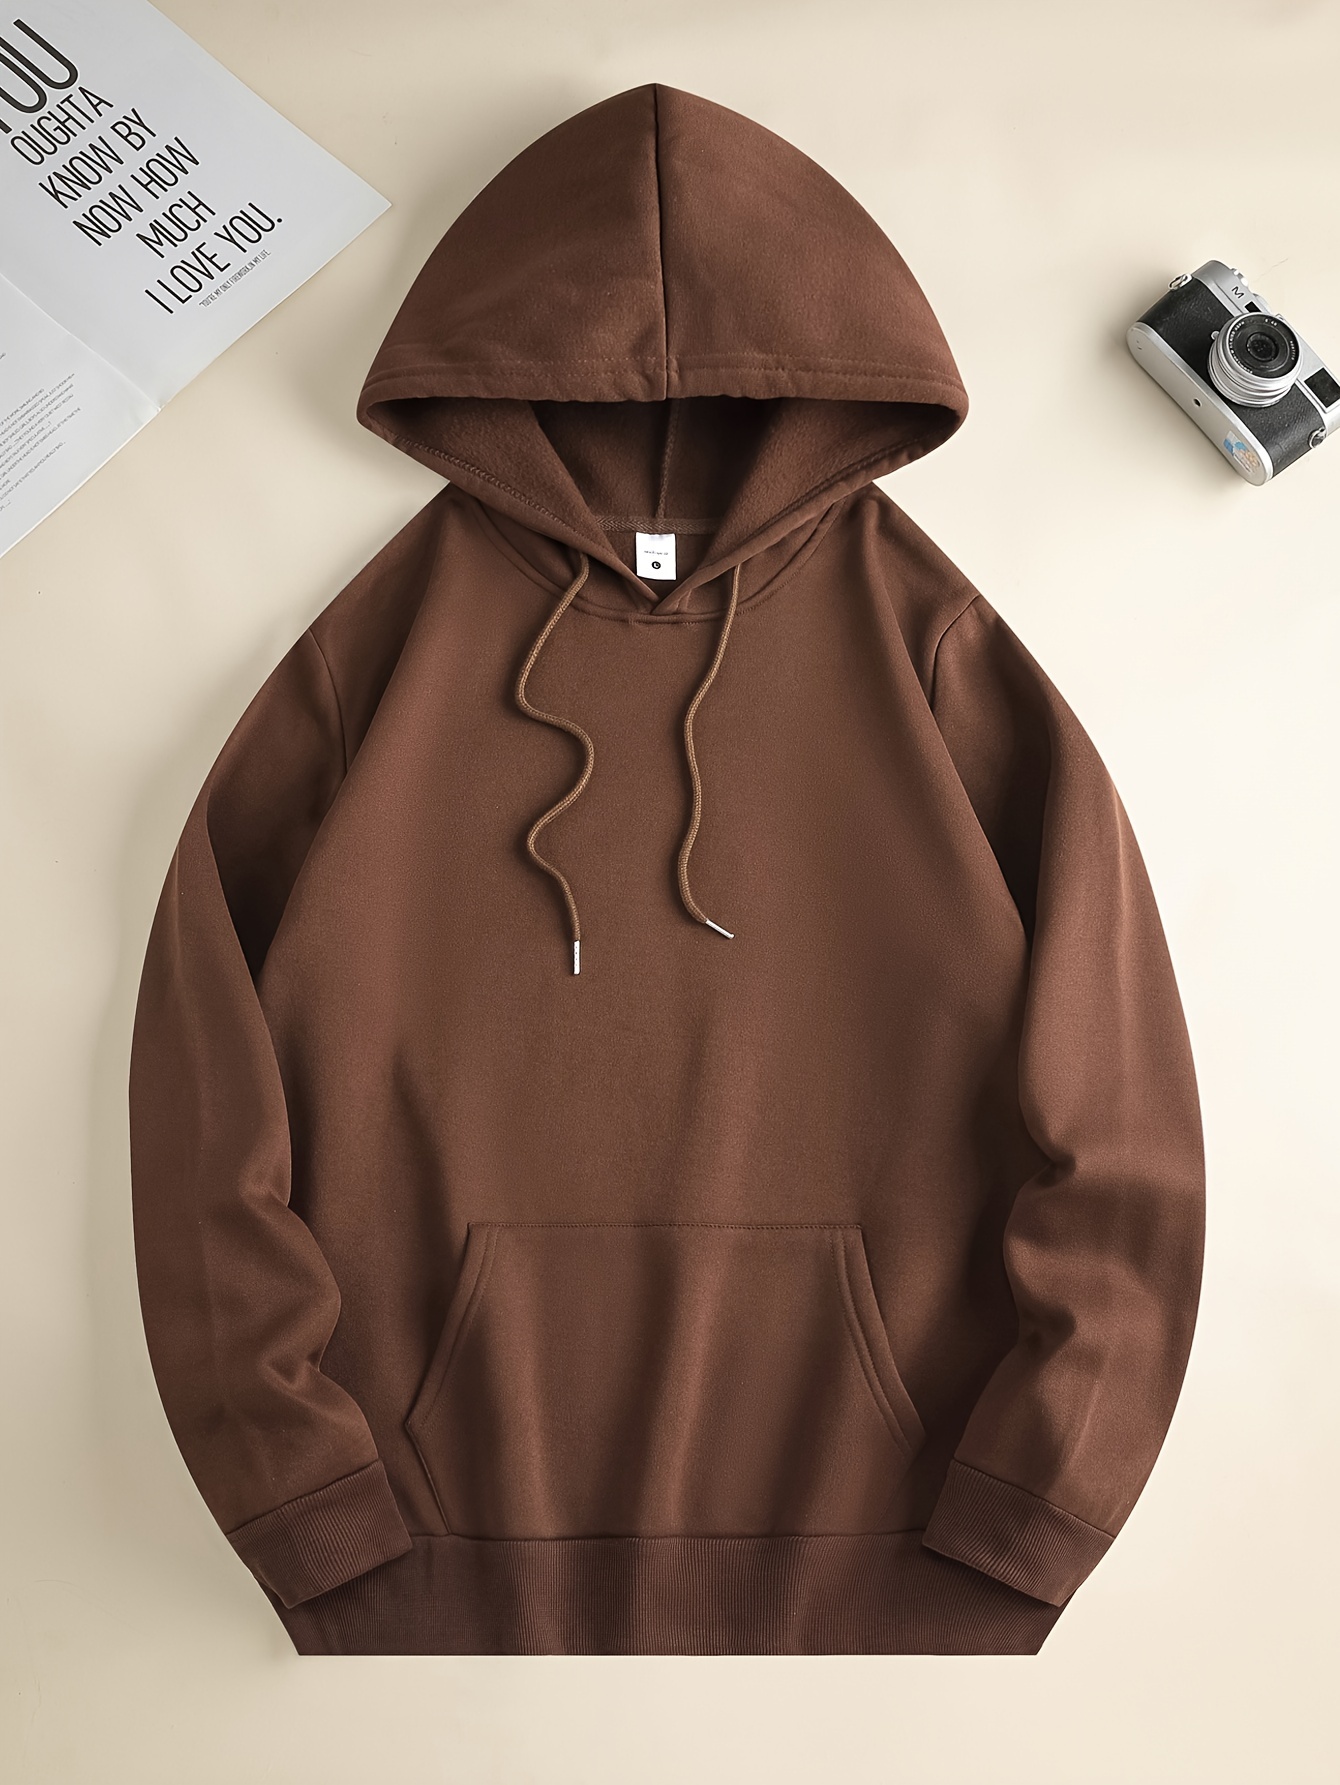 you are amazing print mens pullover round neck hoodies with kangaroo pocket long sleeve hooded sweatshirt loose casual top for autumn winter mens clothing as gifts details 38